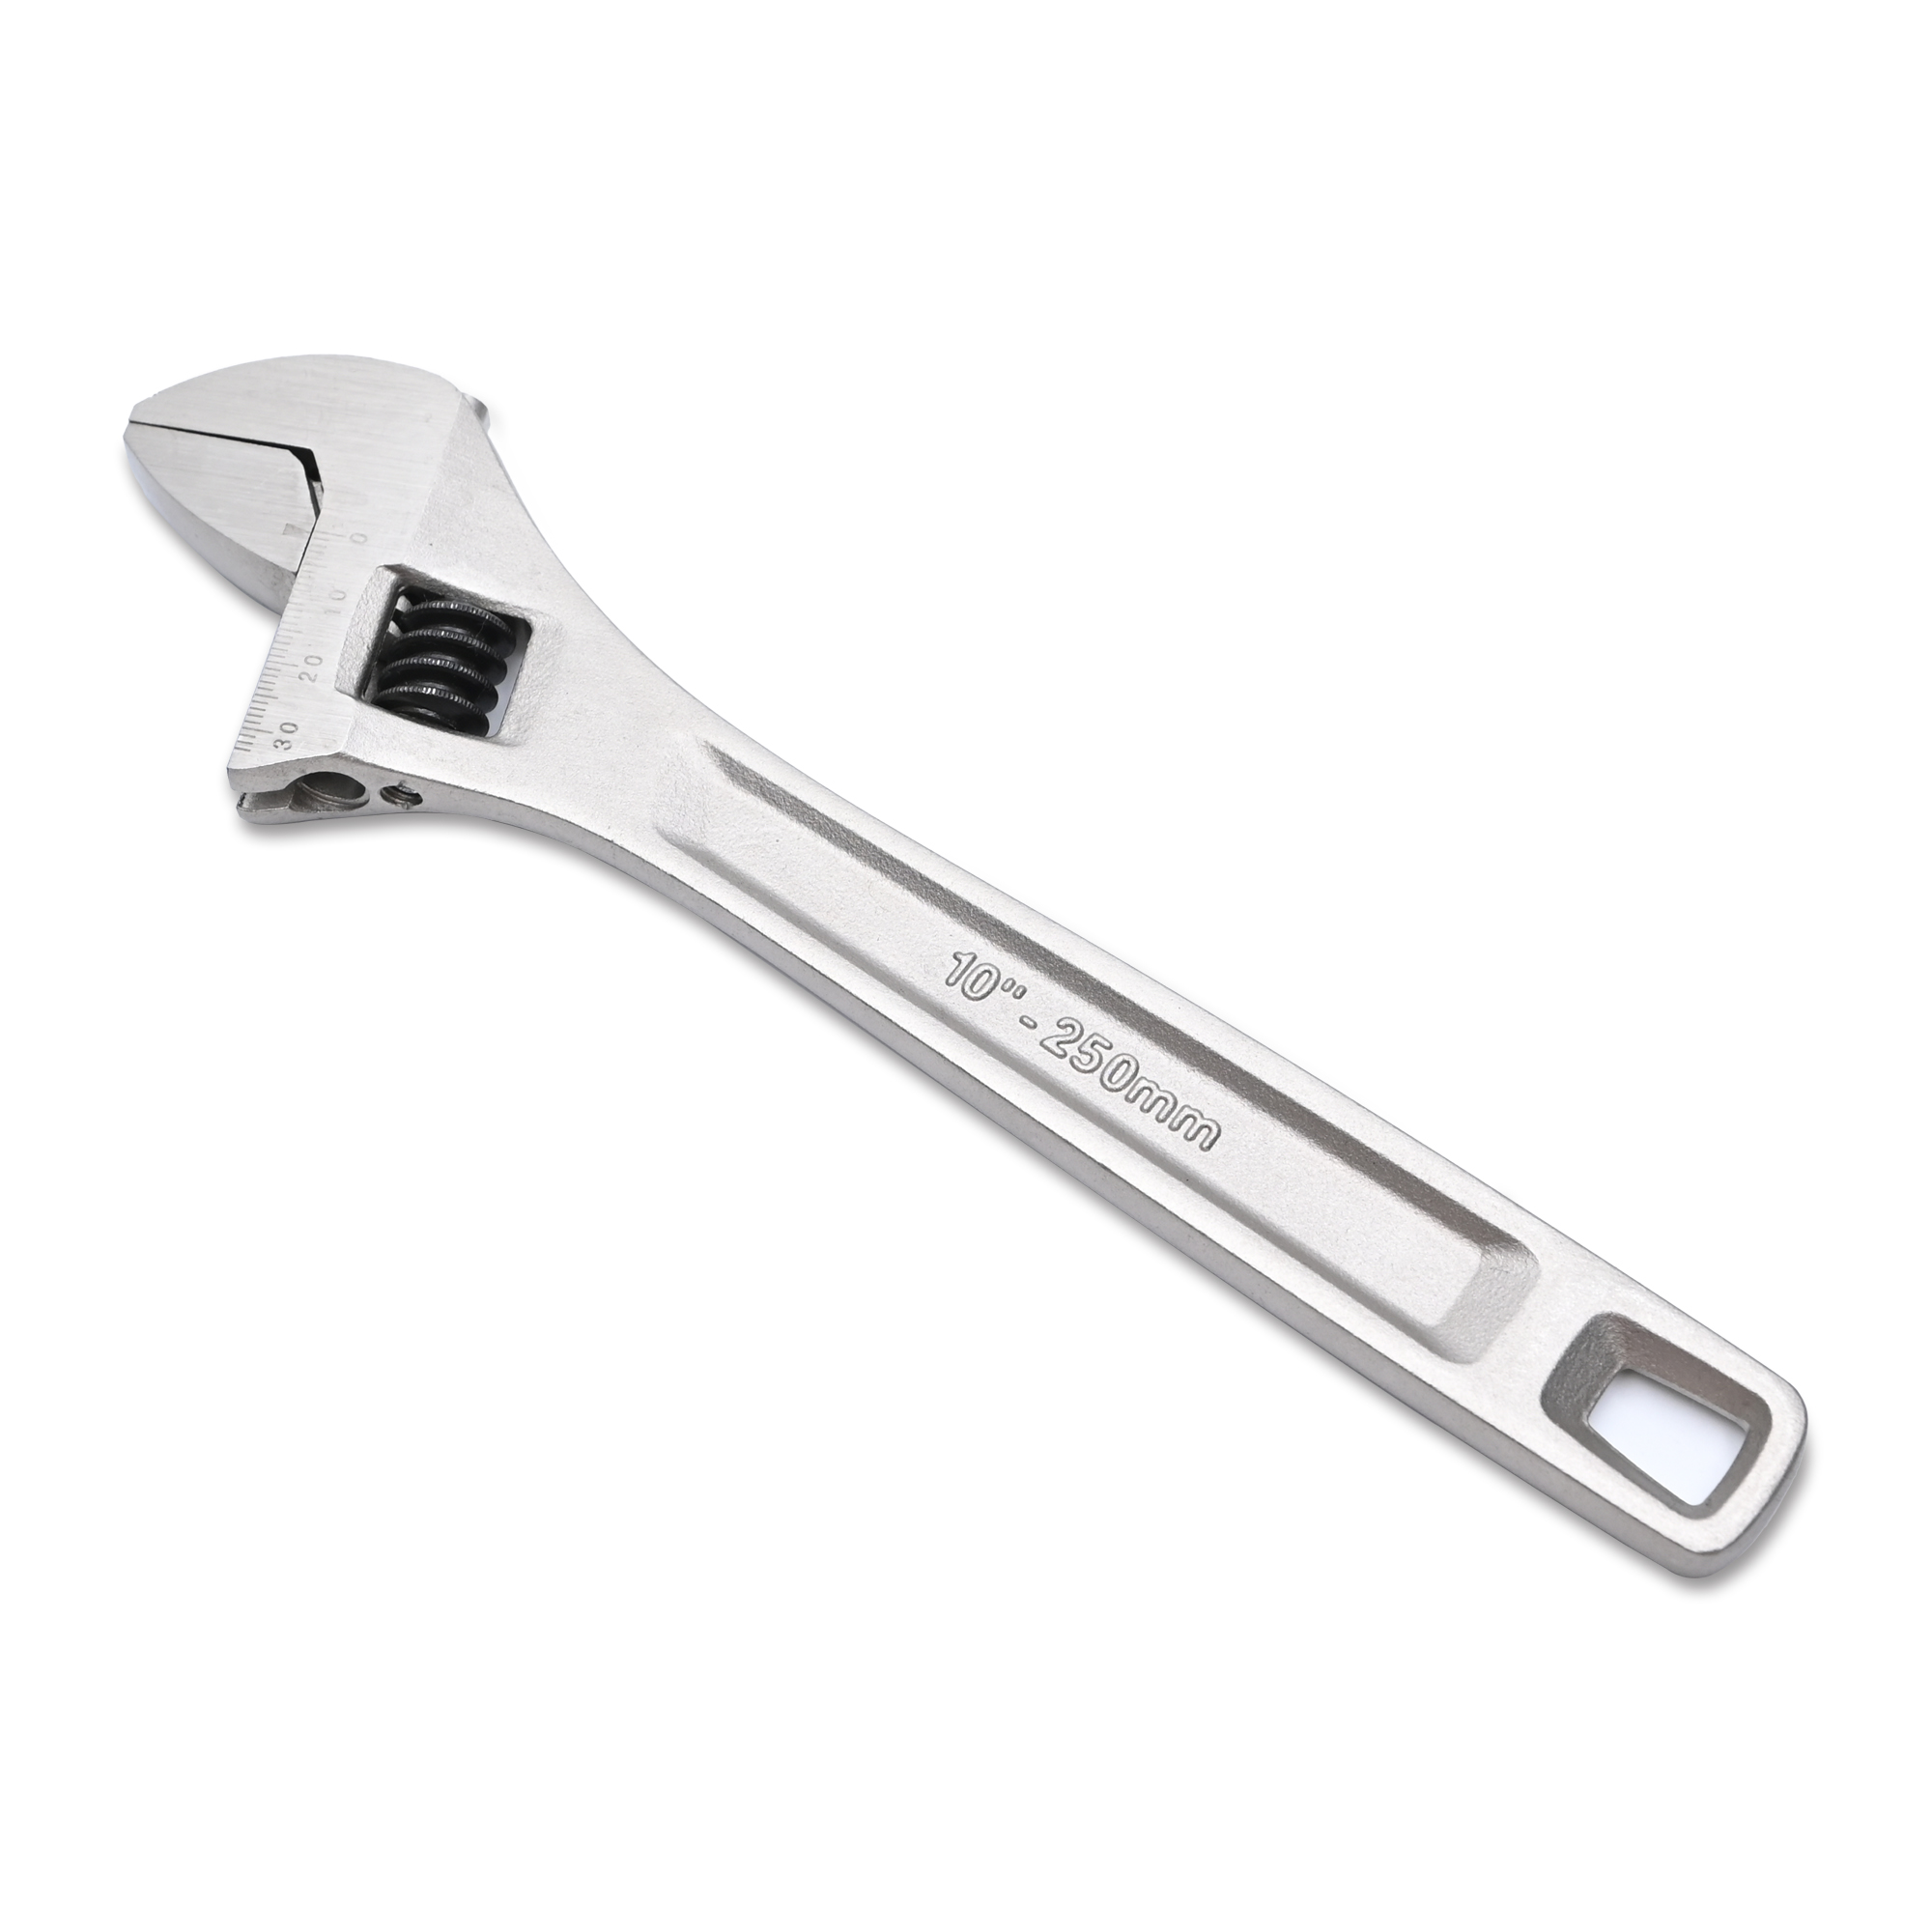 Industrial Torque Wrenches